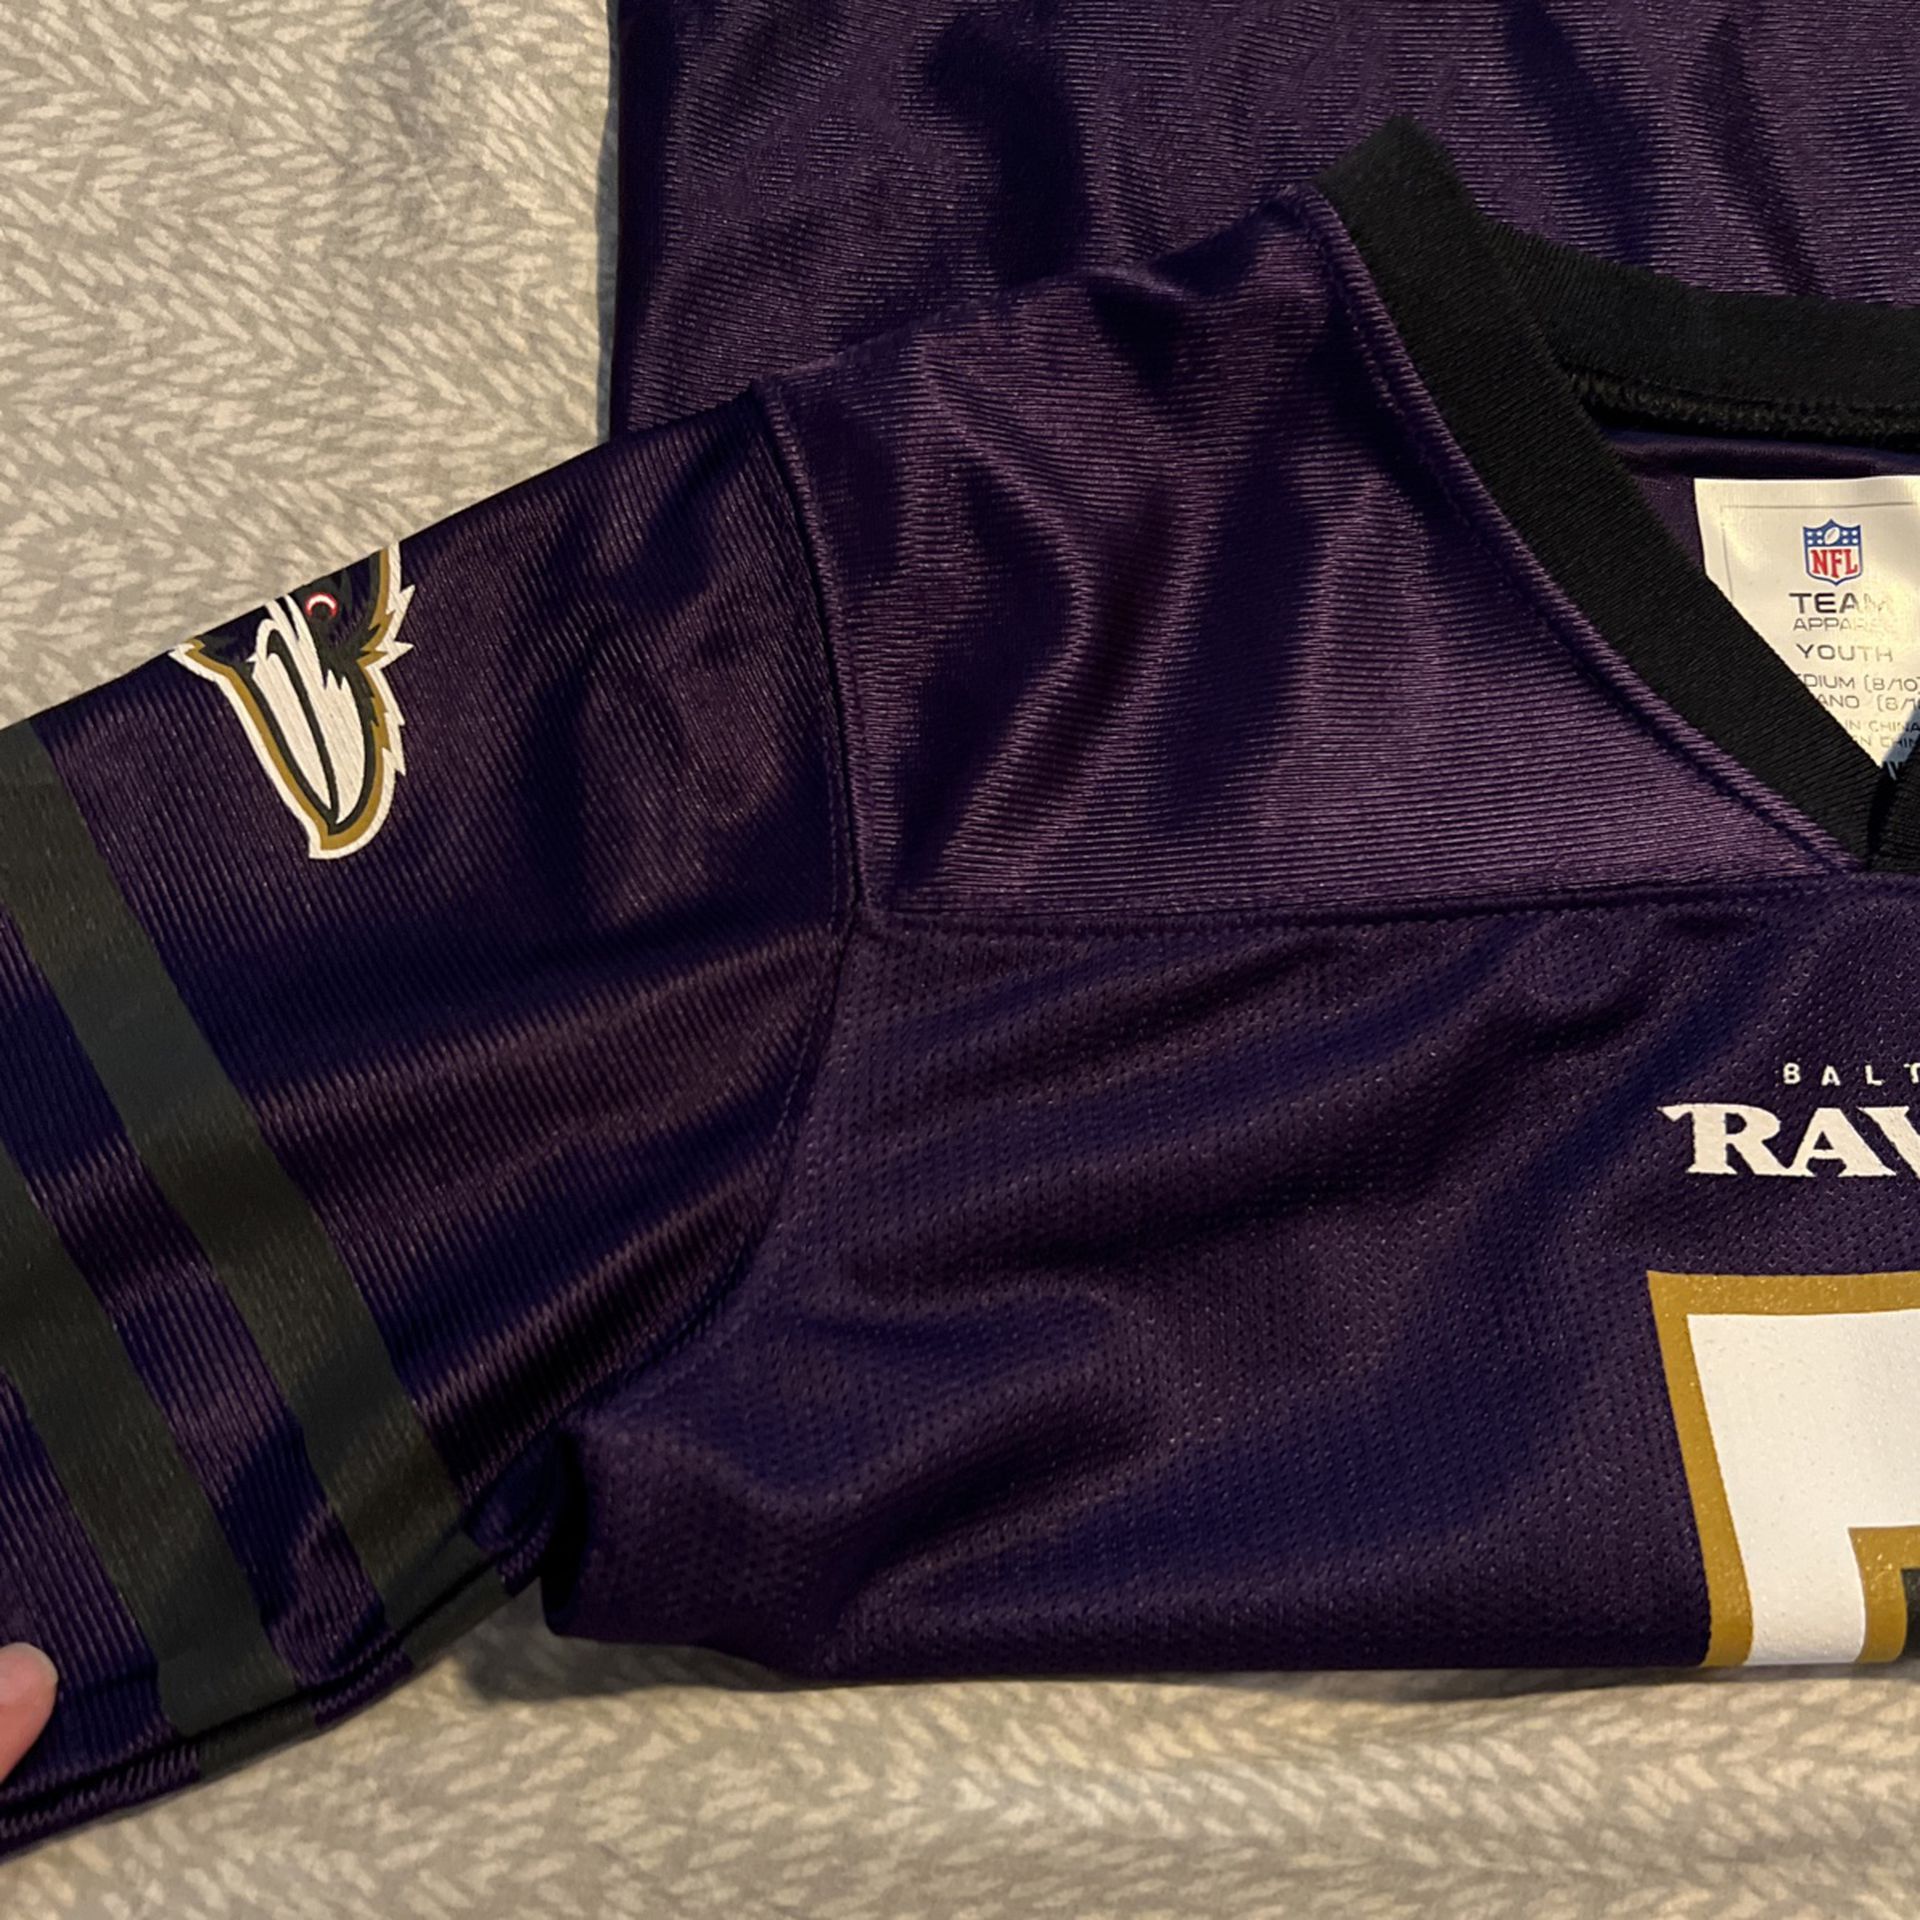 Raven’s Jersey Brand New Youth 8/10 NFL Authentic 